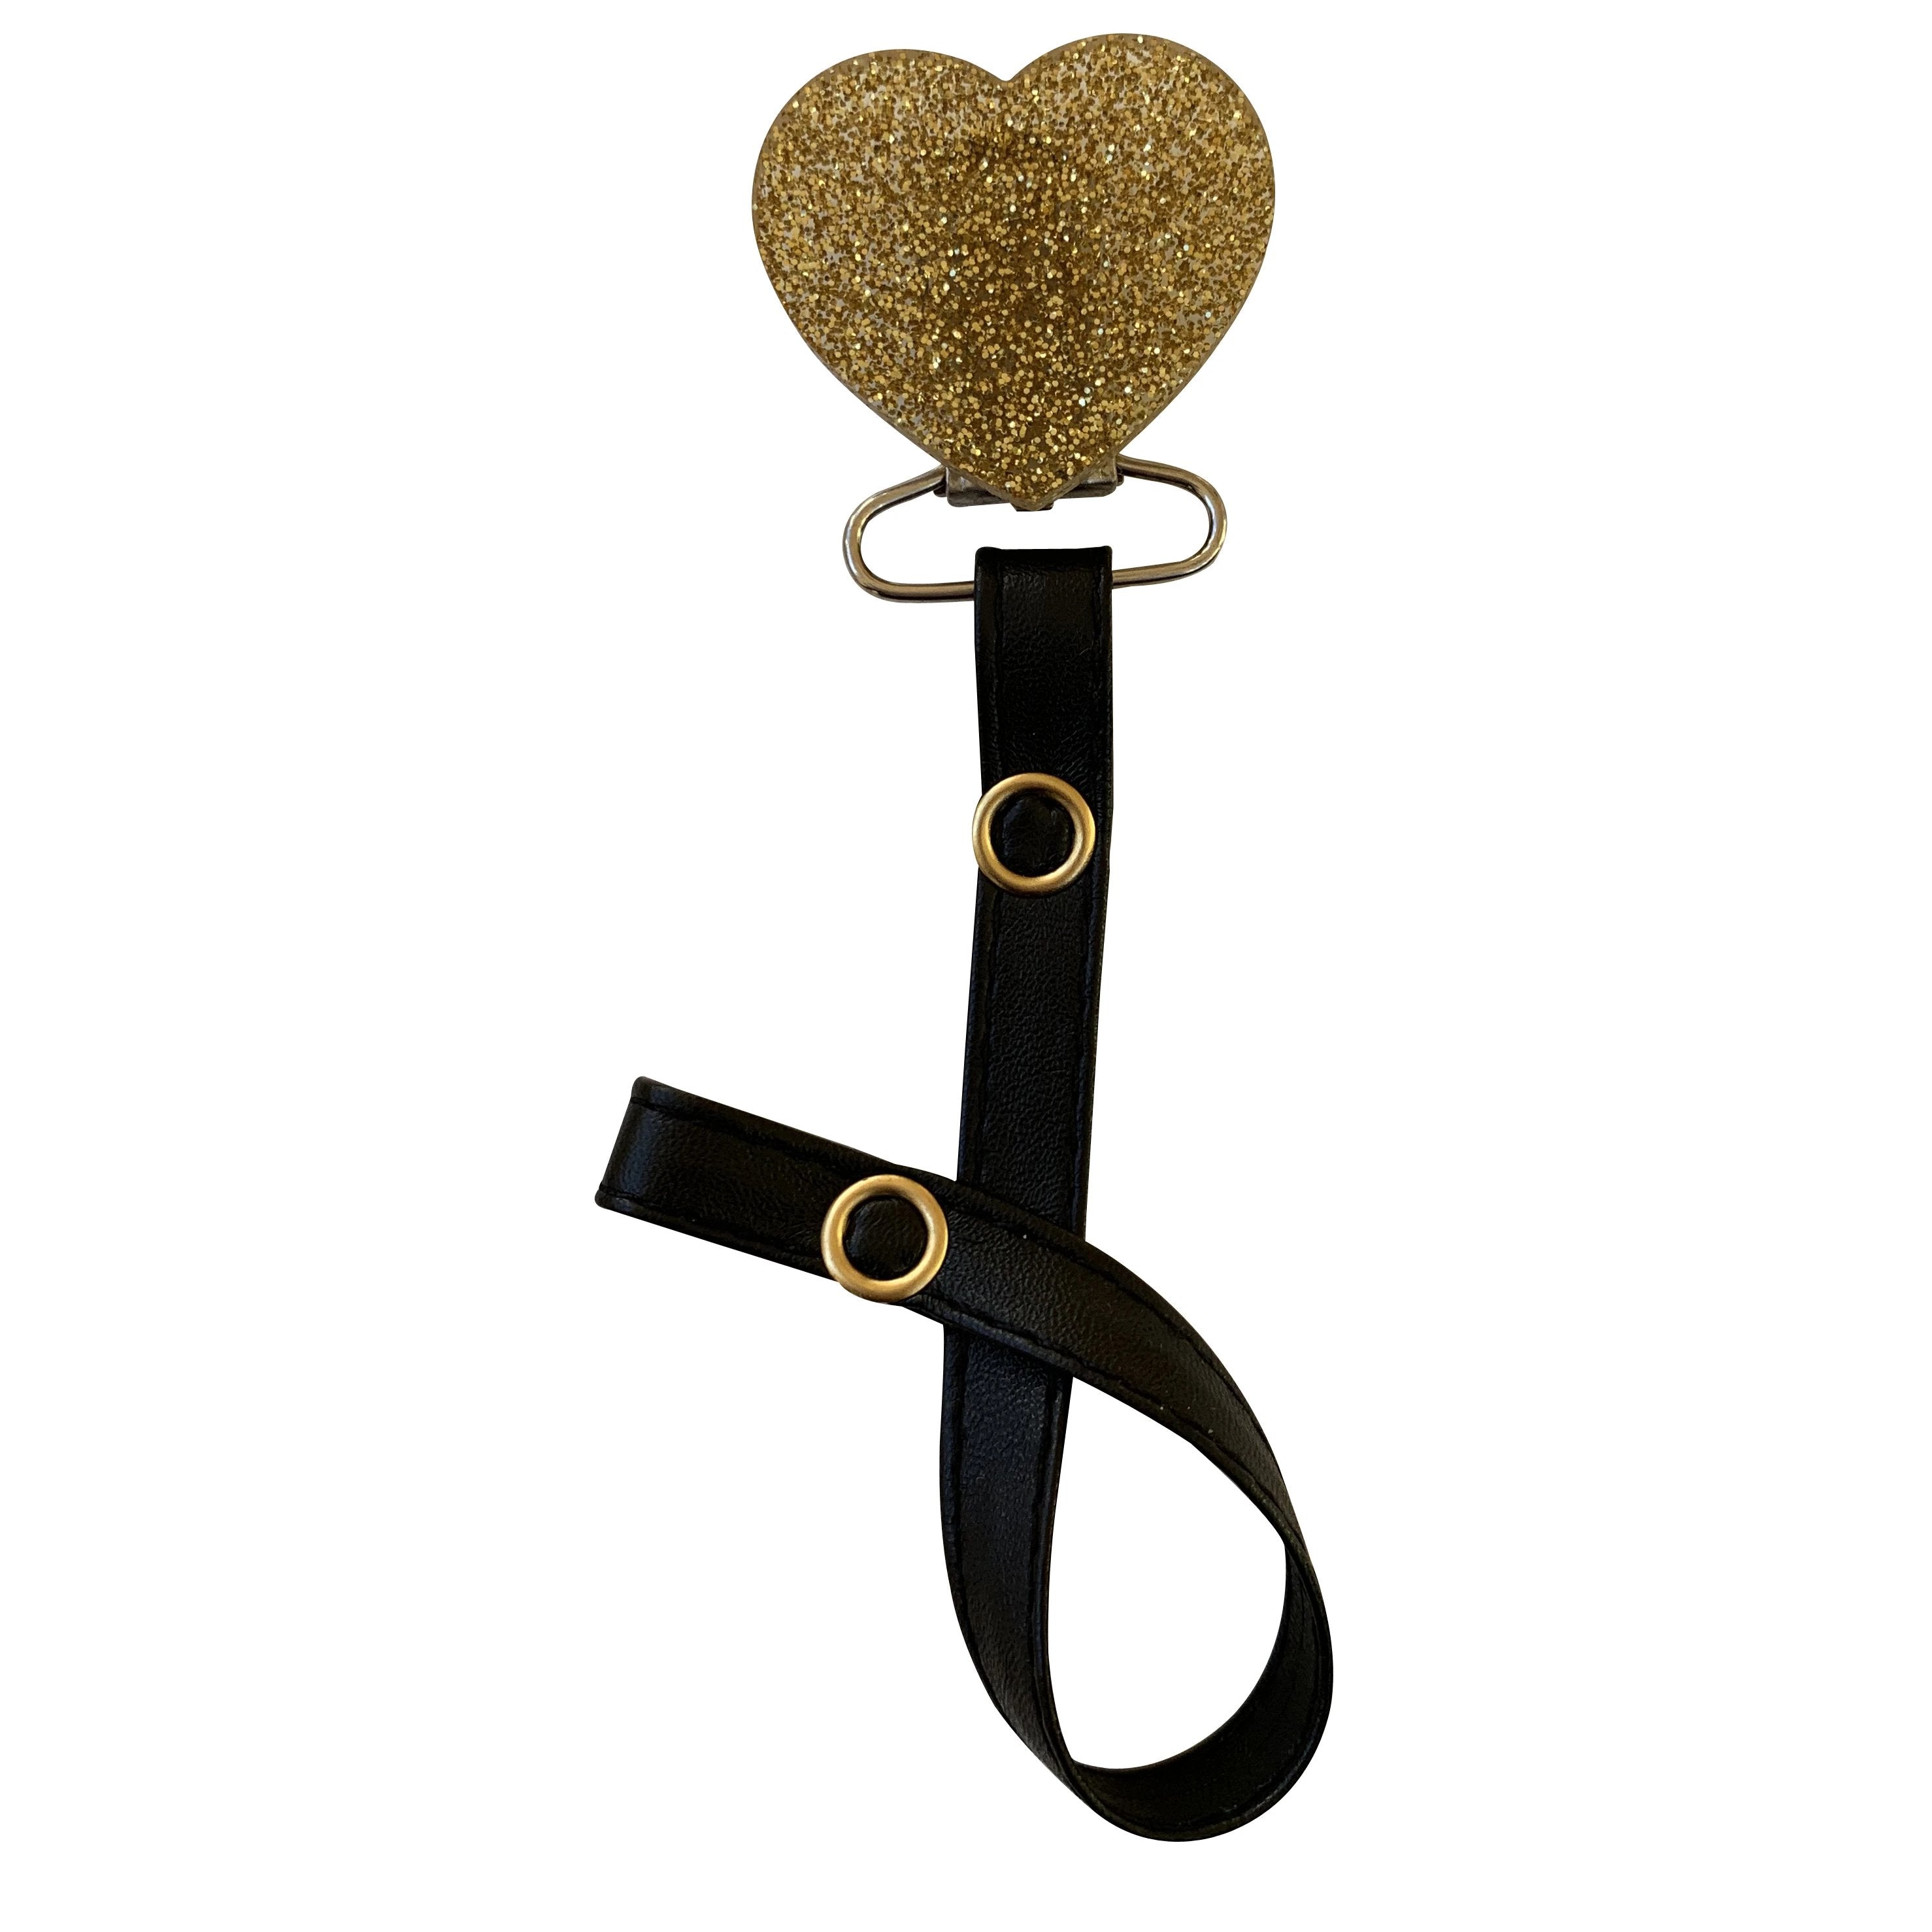 Classy Paci TWINKLE Gold Heart clip with Bibs pacifier GIFT SET